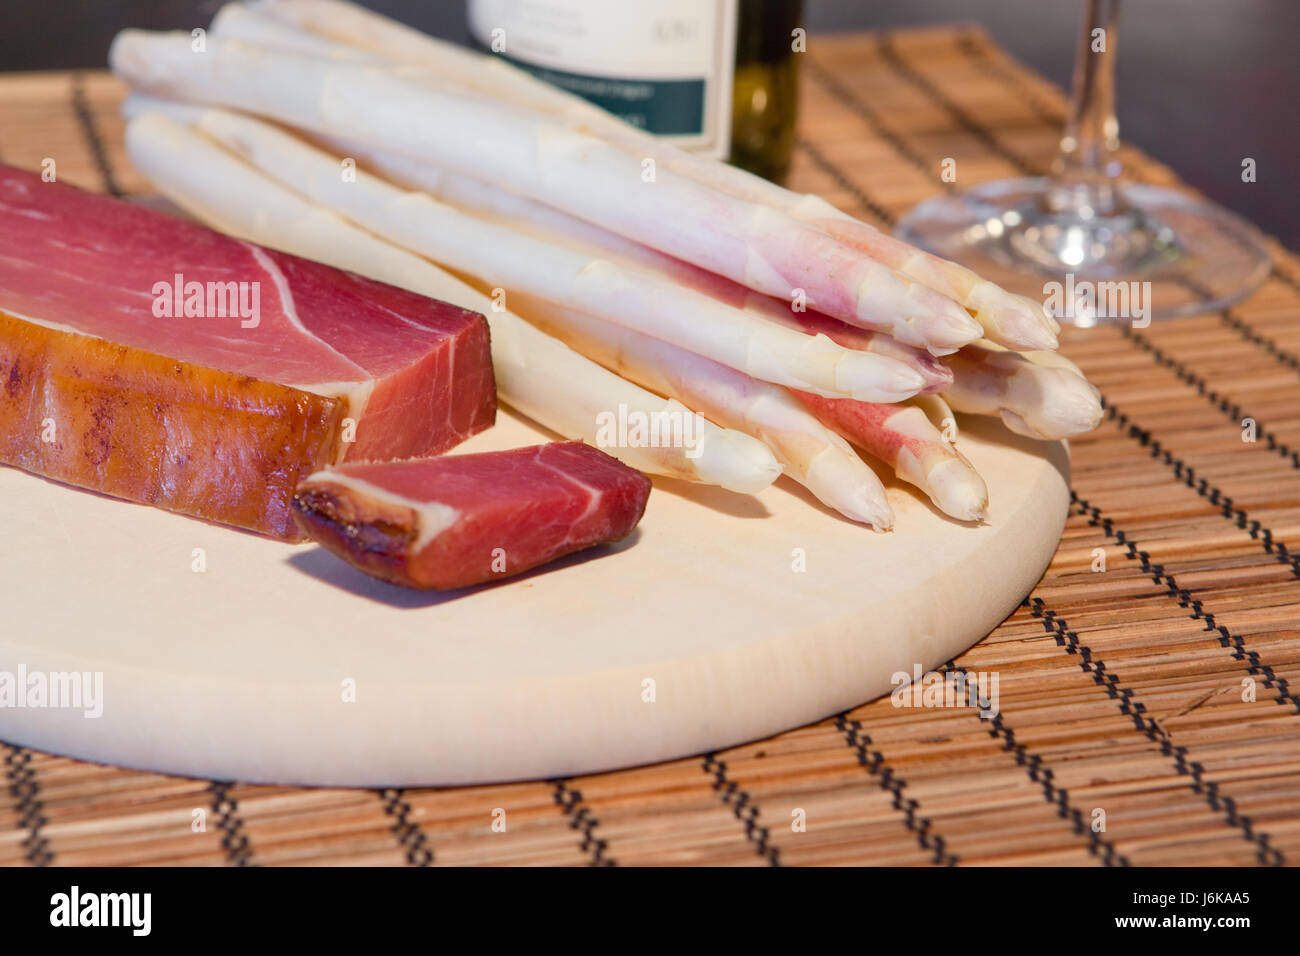 asparagus,bacon and wine Stock Photo